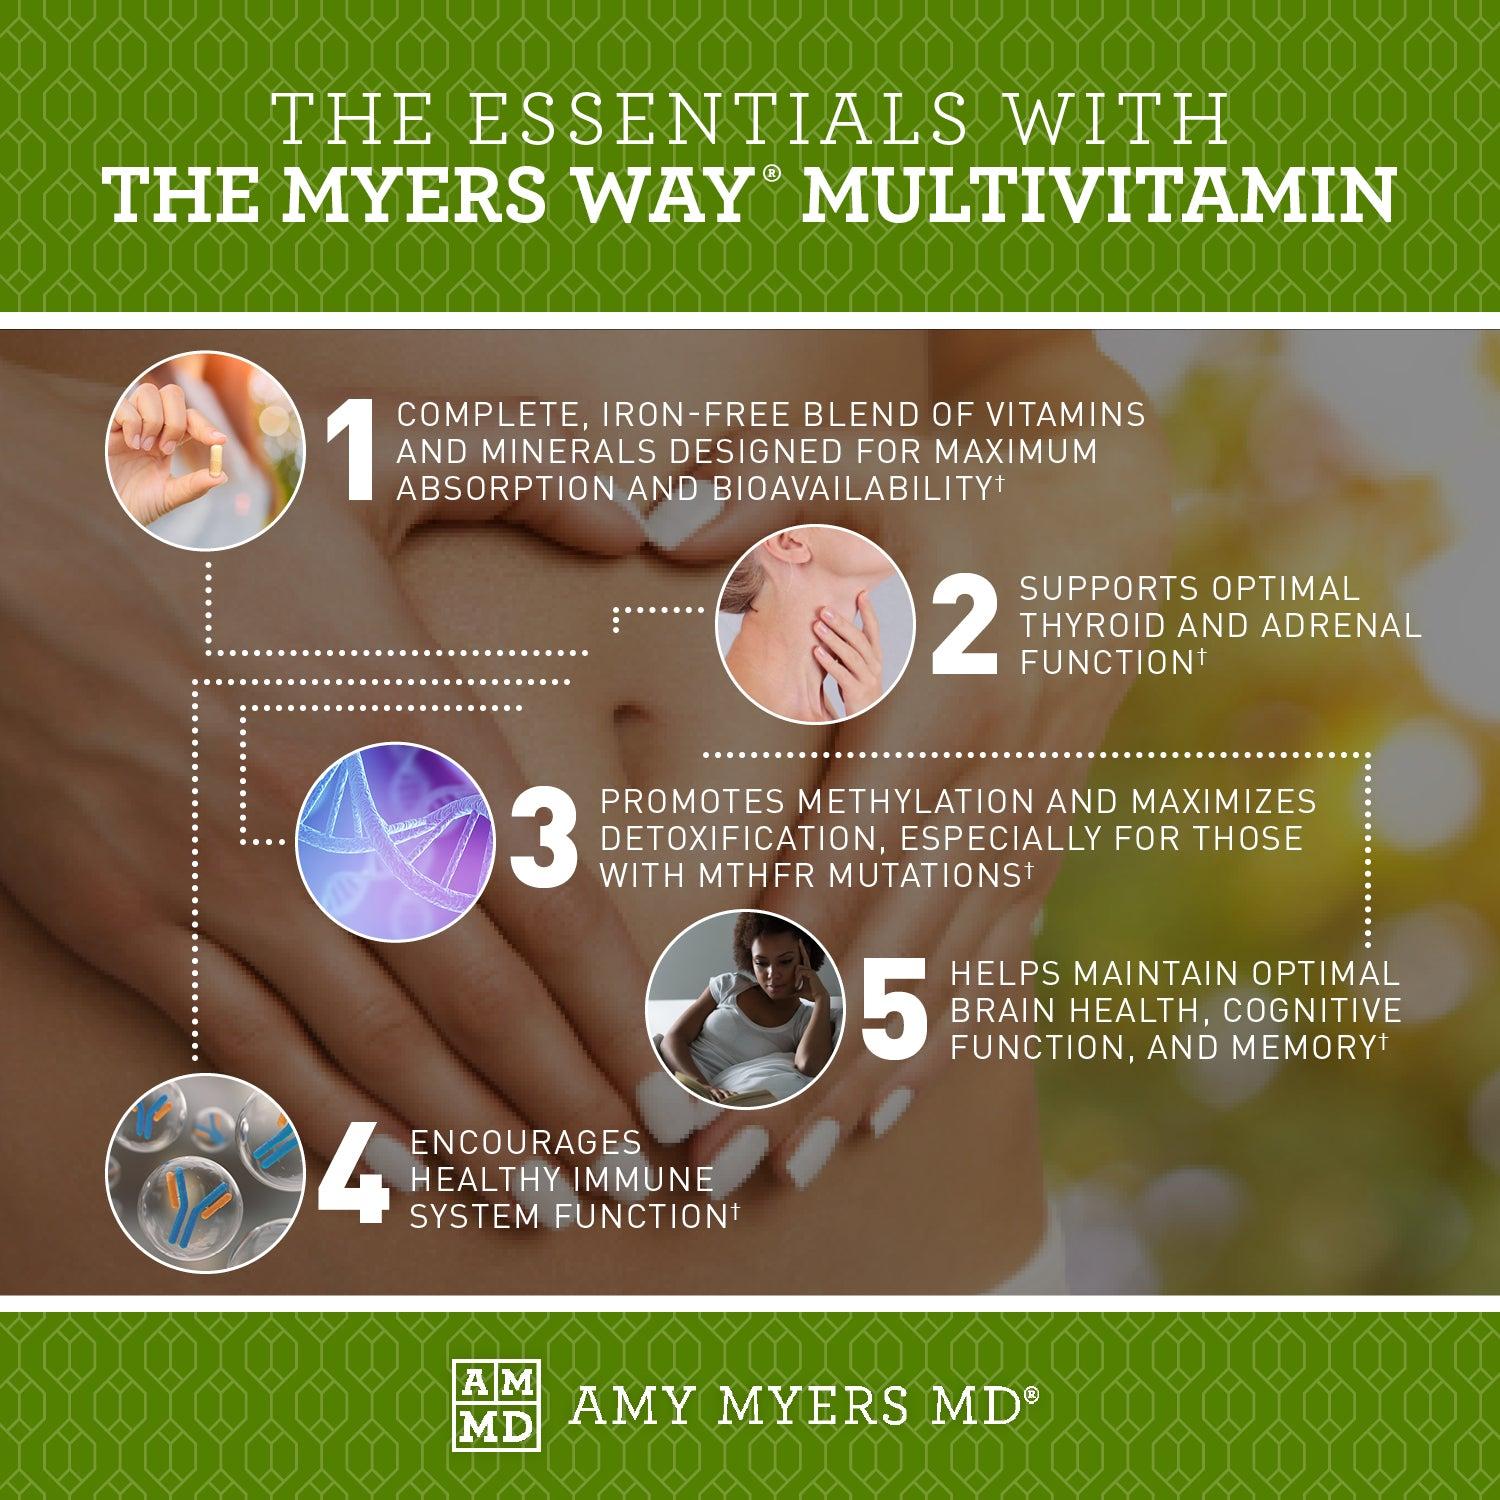 Multivitamin 7 Day Pack - Iron-free blend of vitamins, optimal thyroid and adrenal function, promotes methylation and detoxification, brain health, healthy cognitive function, and immune system function - Infographic - Amy Myers MD